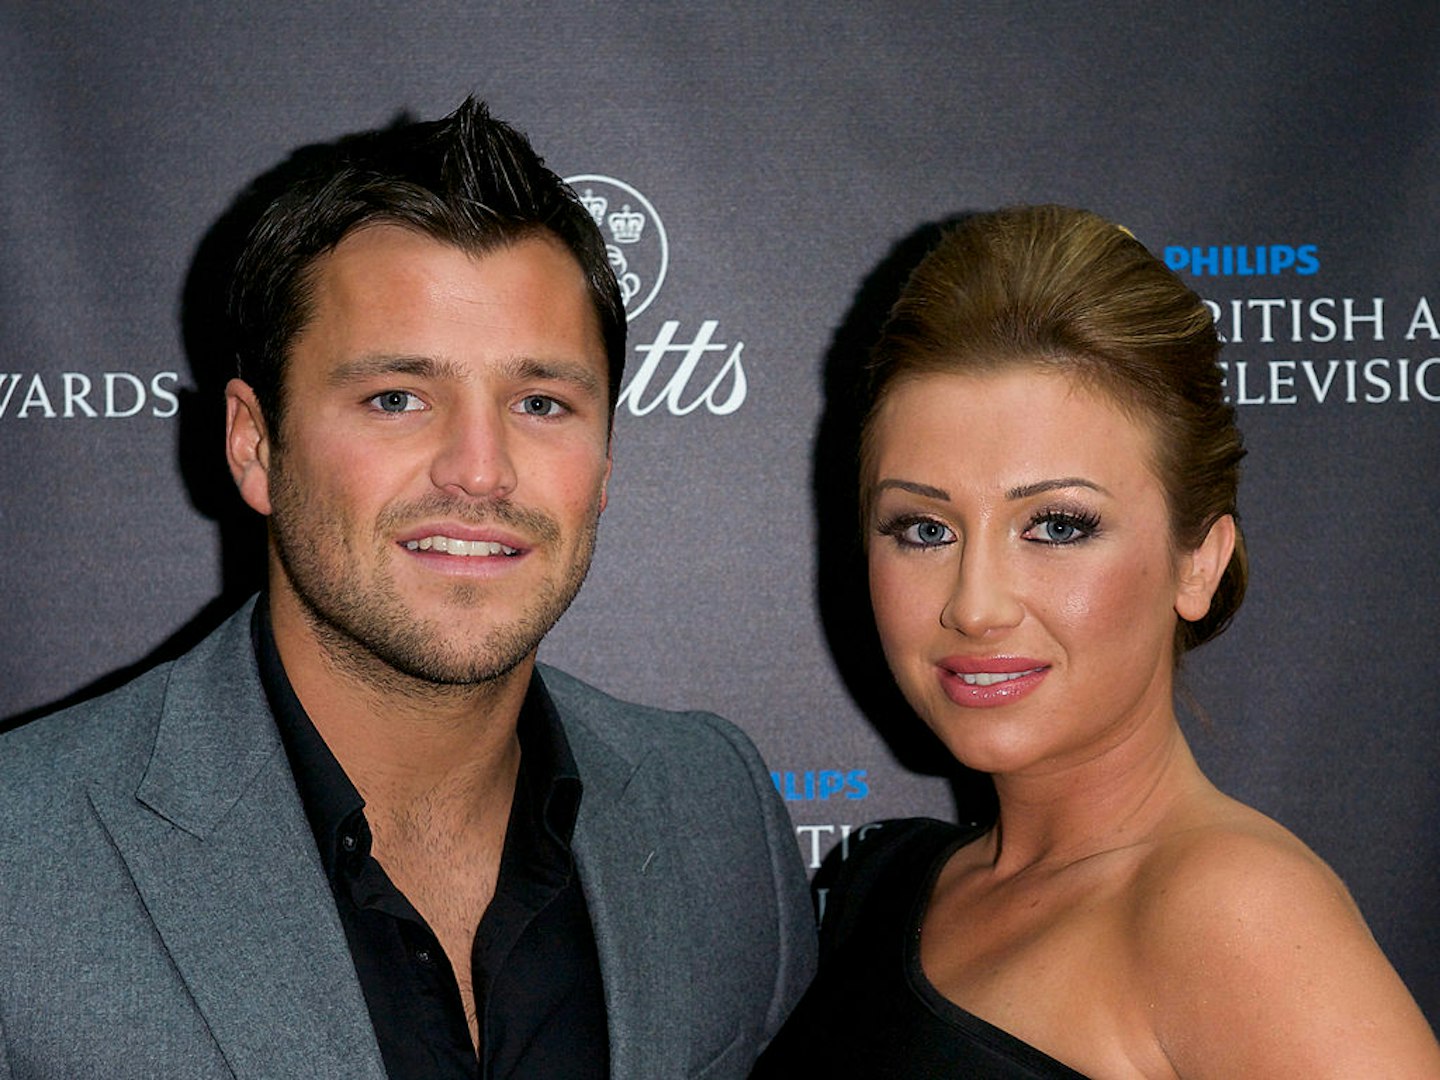 Mark Wright and Lauren Goodger pose on the red carpet in 2011